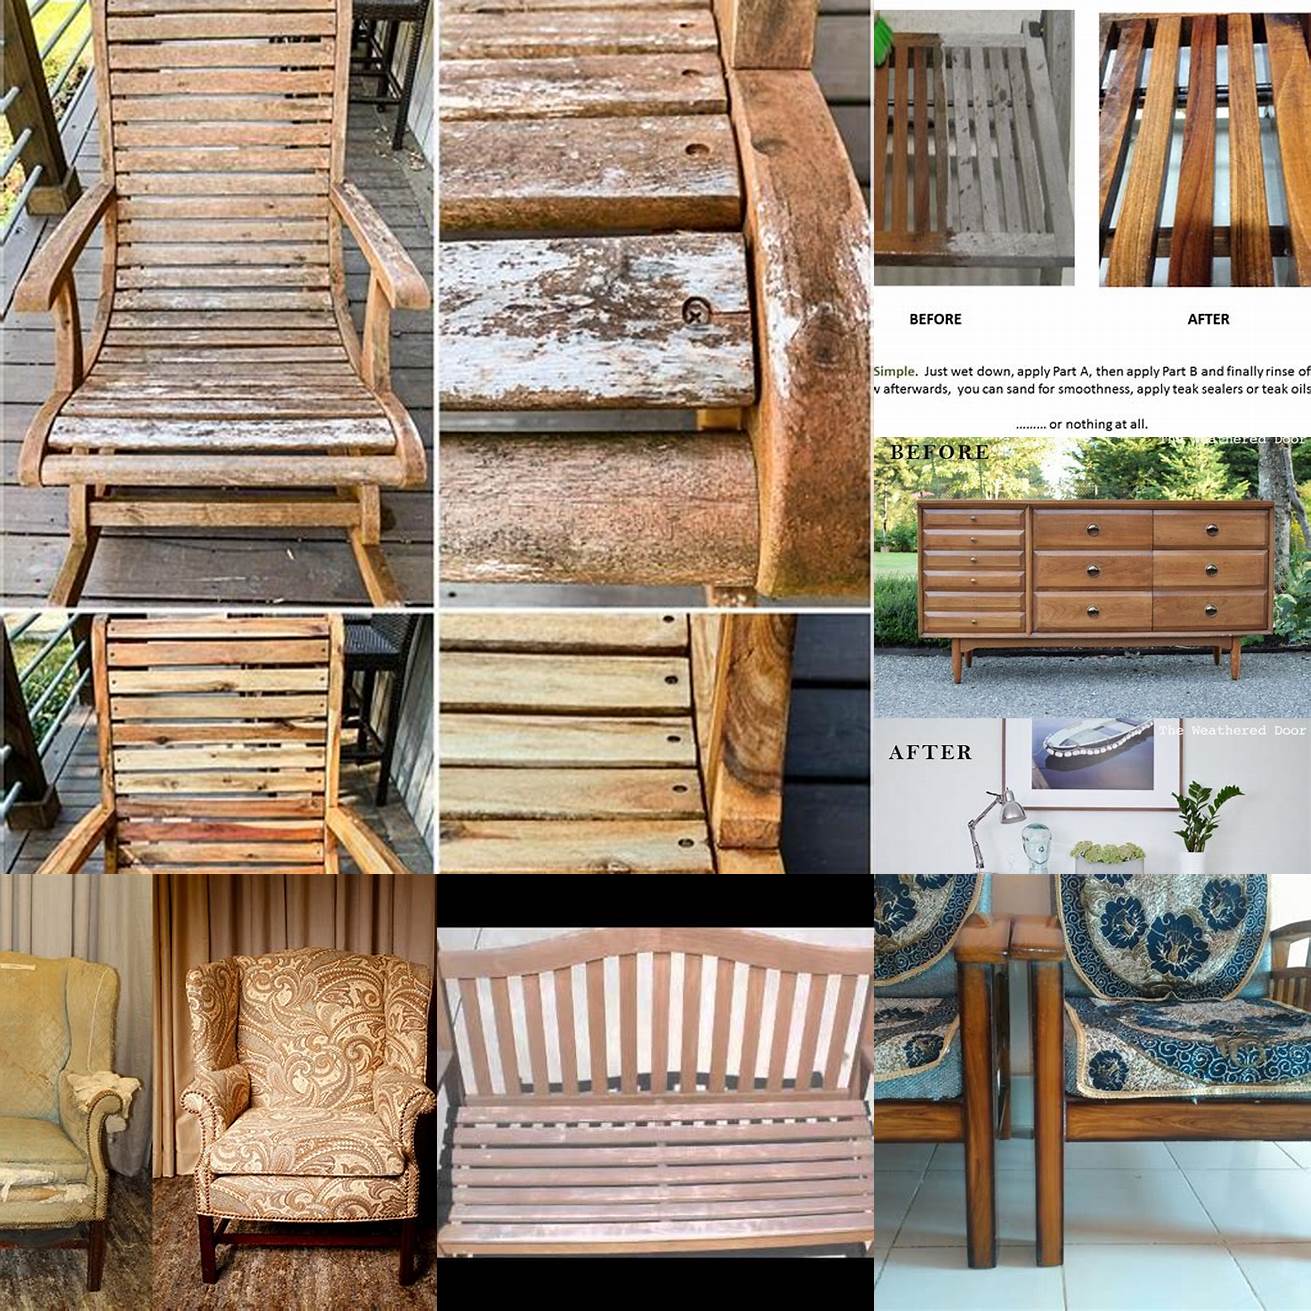 Teak furniture before and after